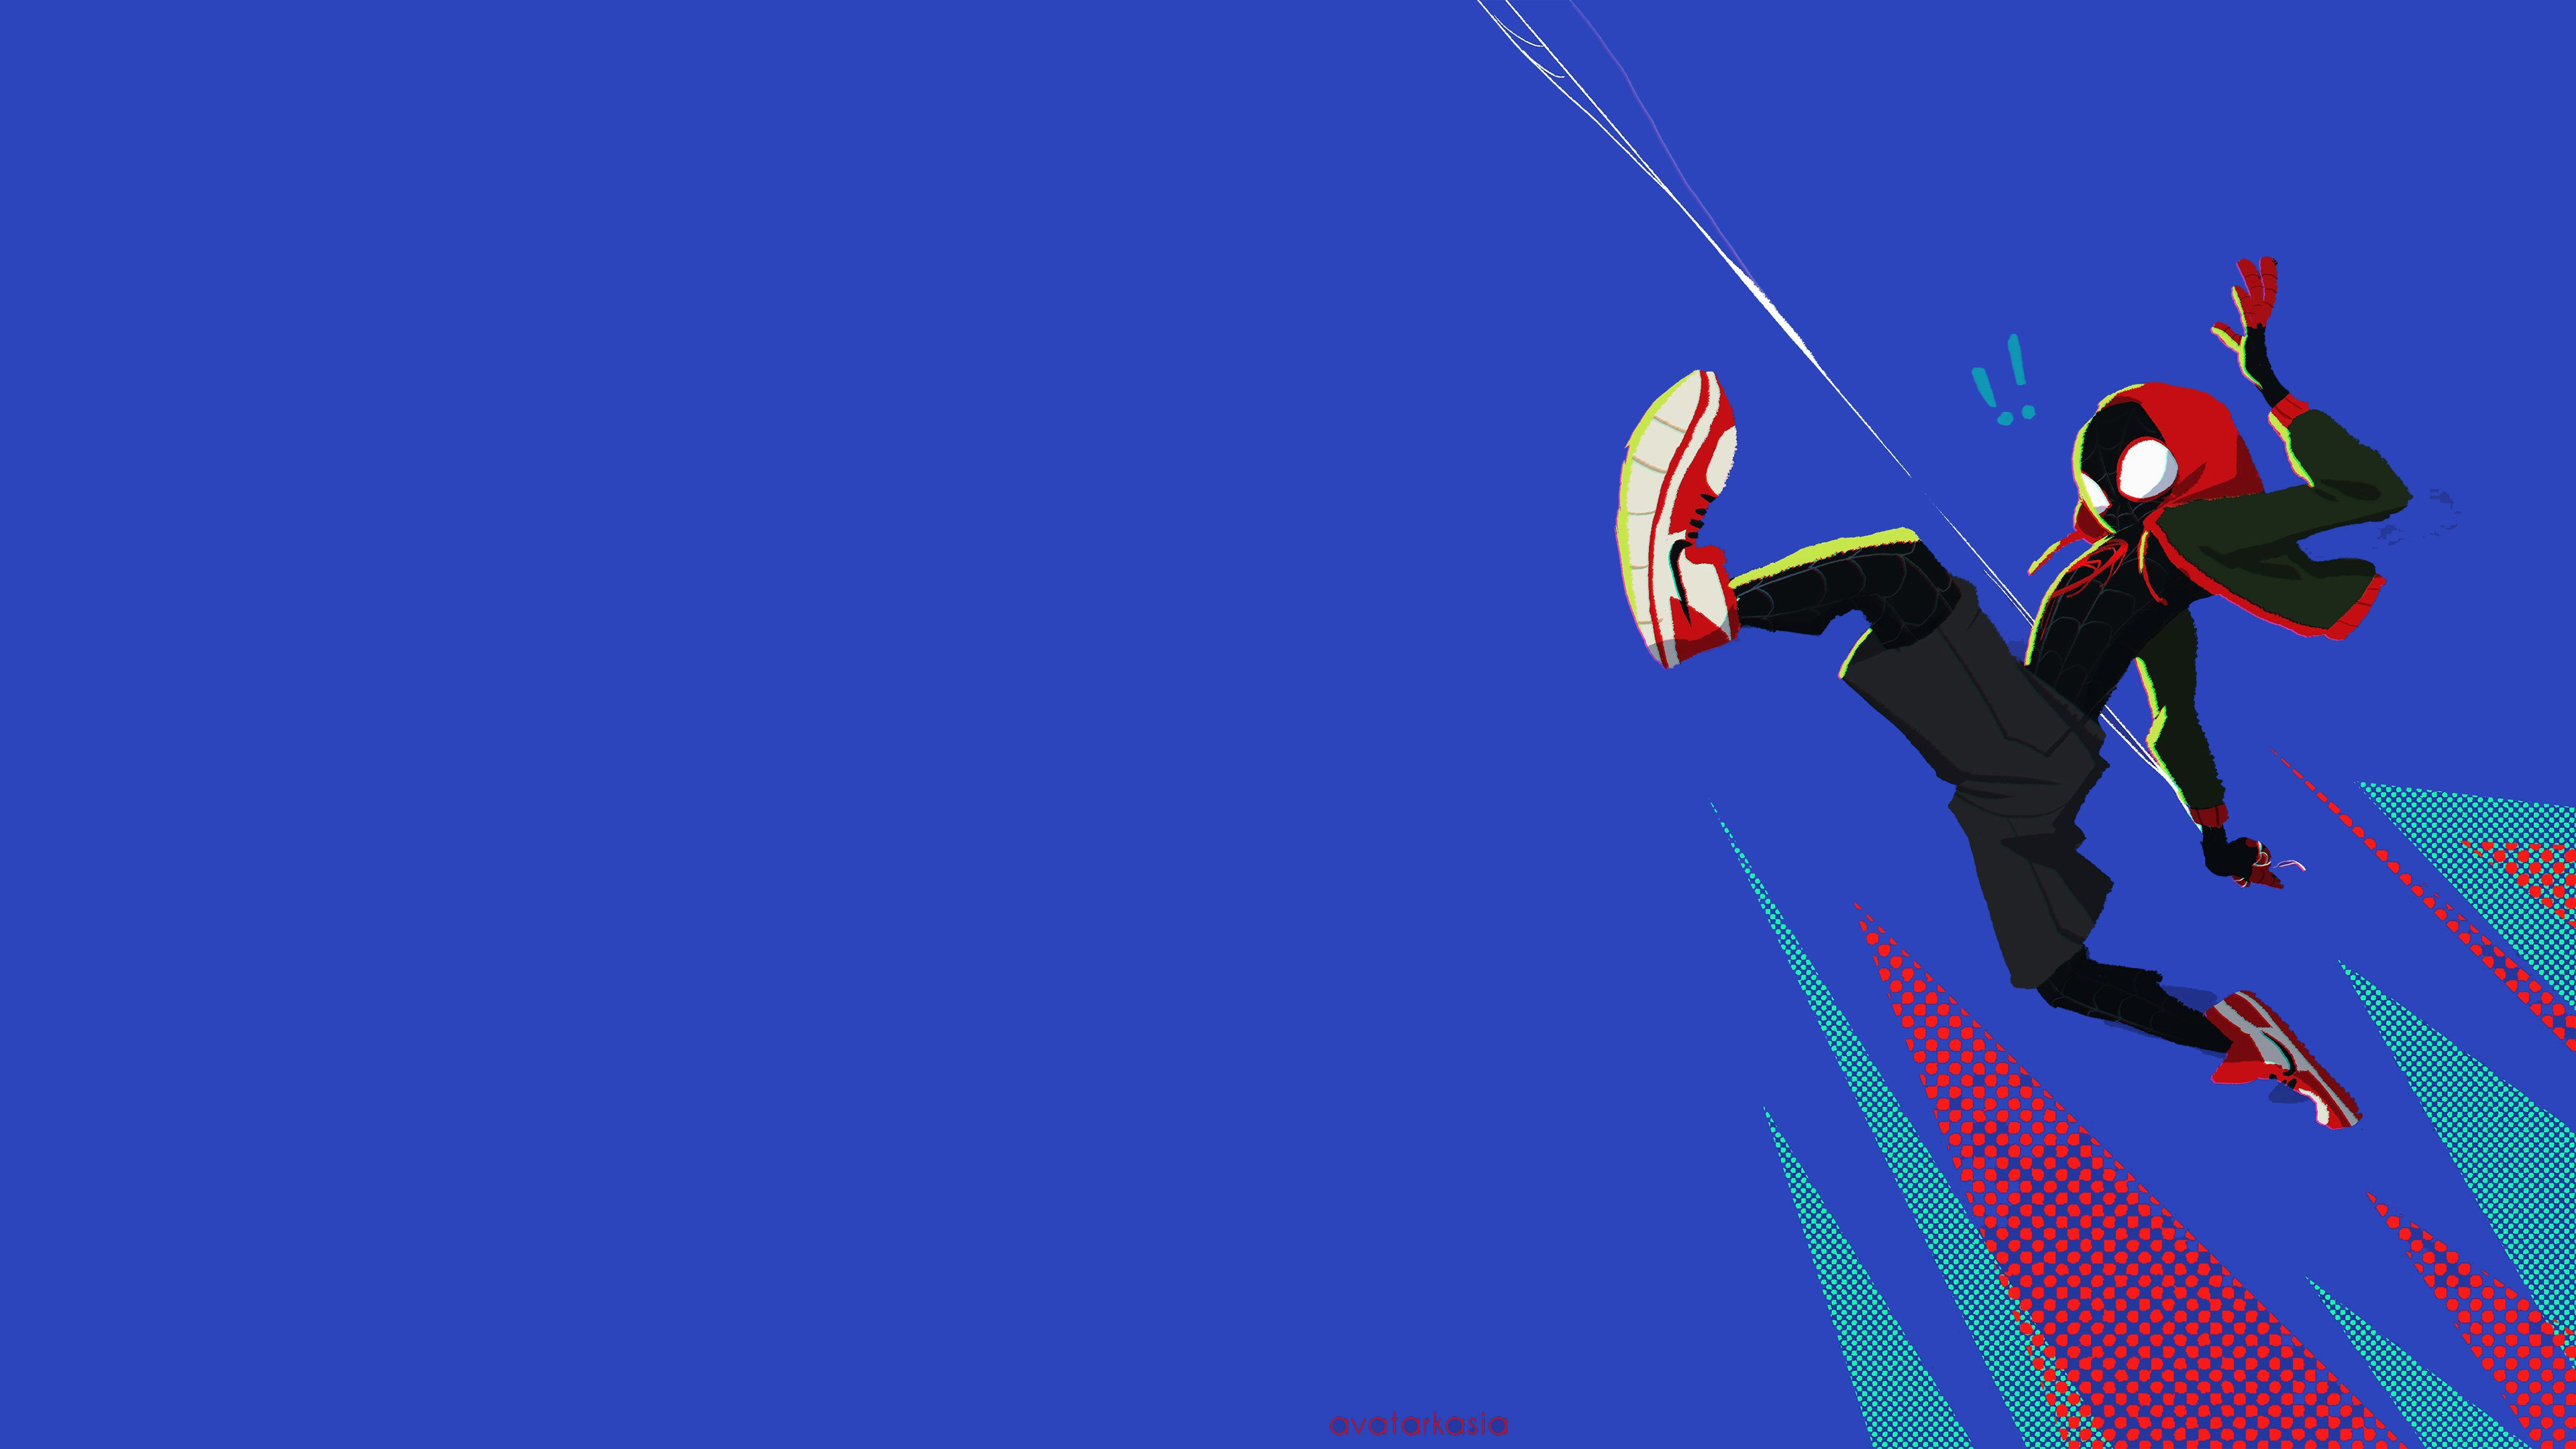 2560x1440 Spiderman Into The Spider Verse Movie 4k 18 Art 1440p Resolution Hd 4k Wallpapers